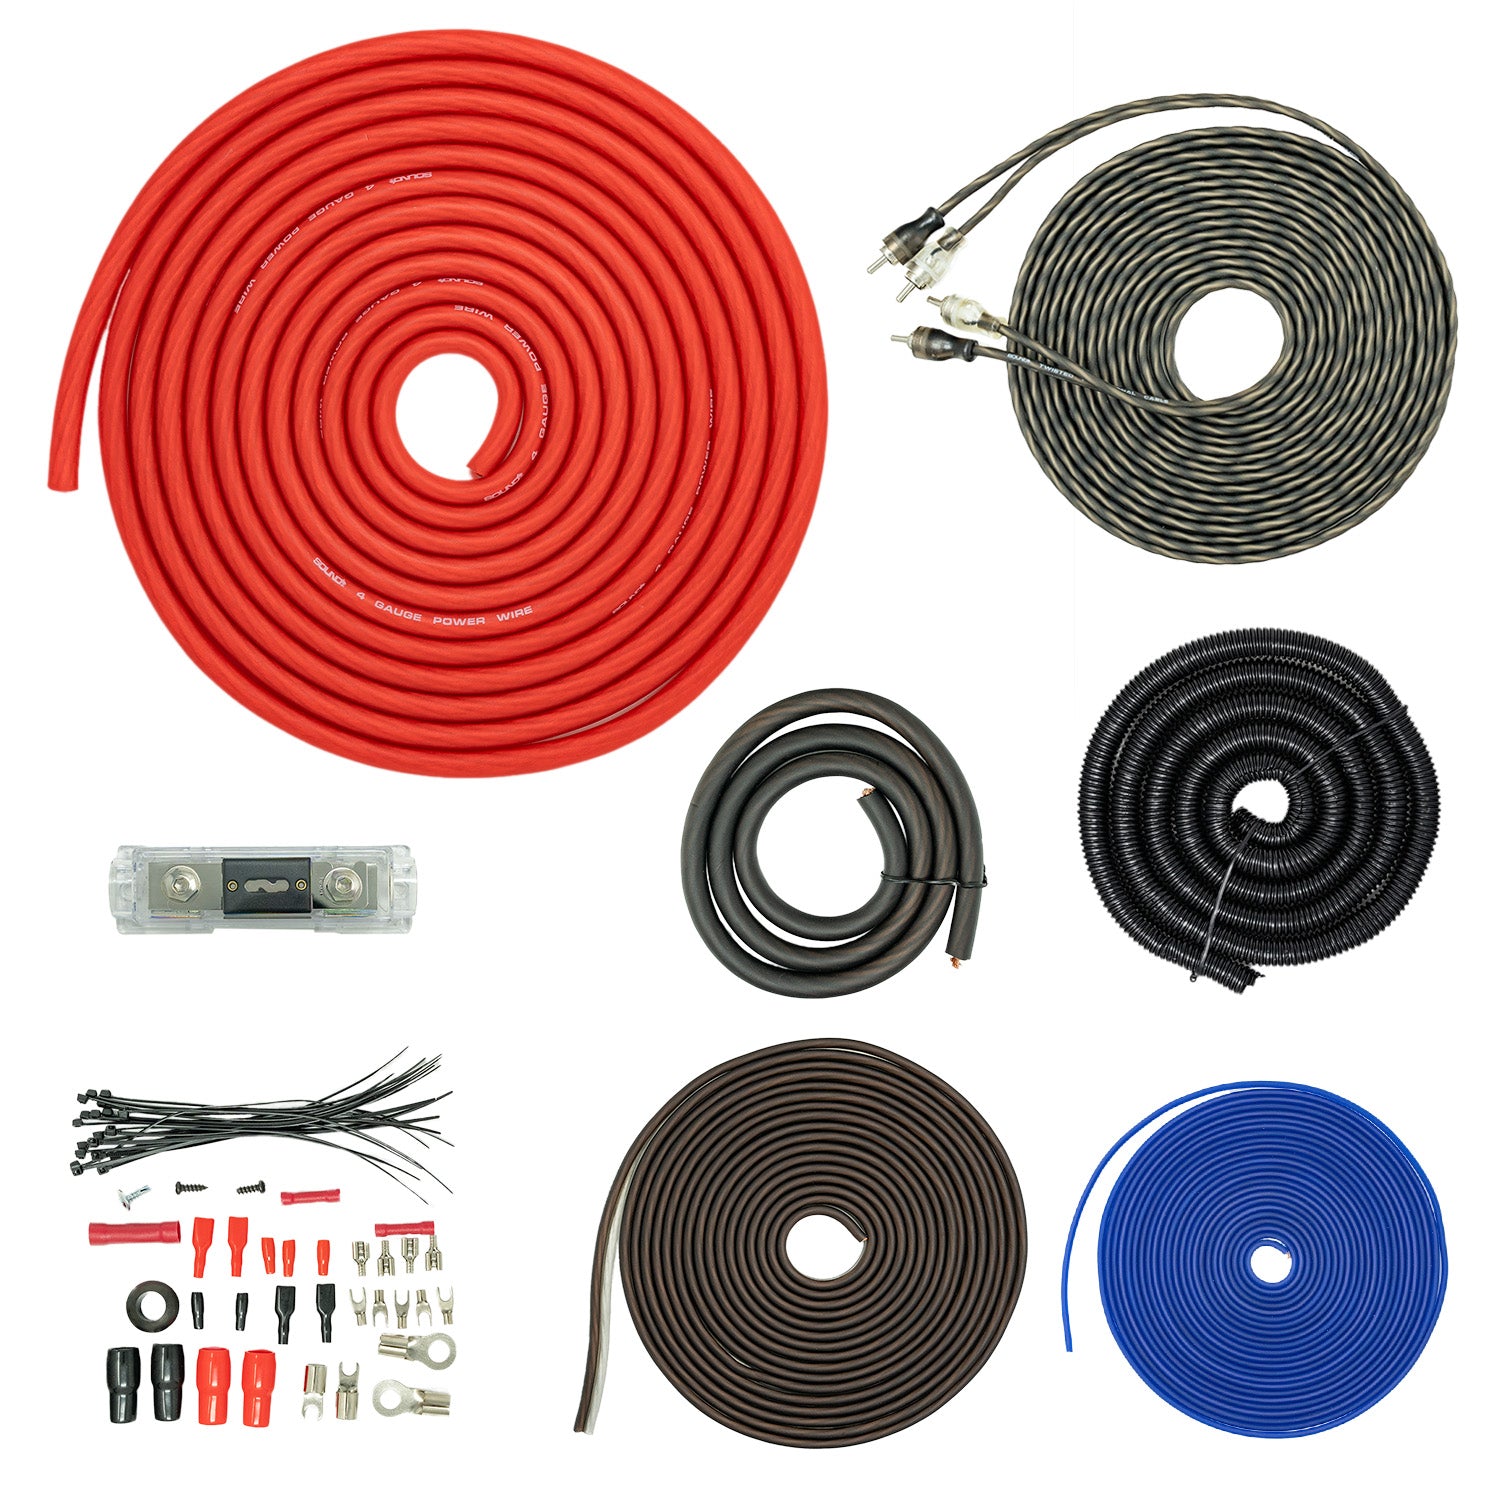 SoundBox T4AW-R, 4 Gauge Amp Kit Complete Amplifier Install Wiring Cable - 4500W